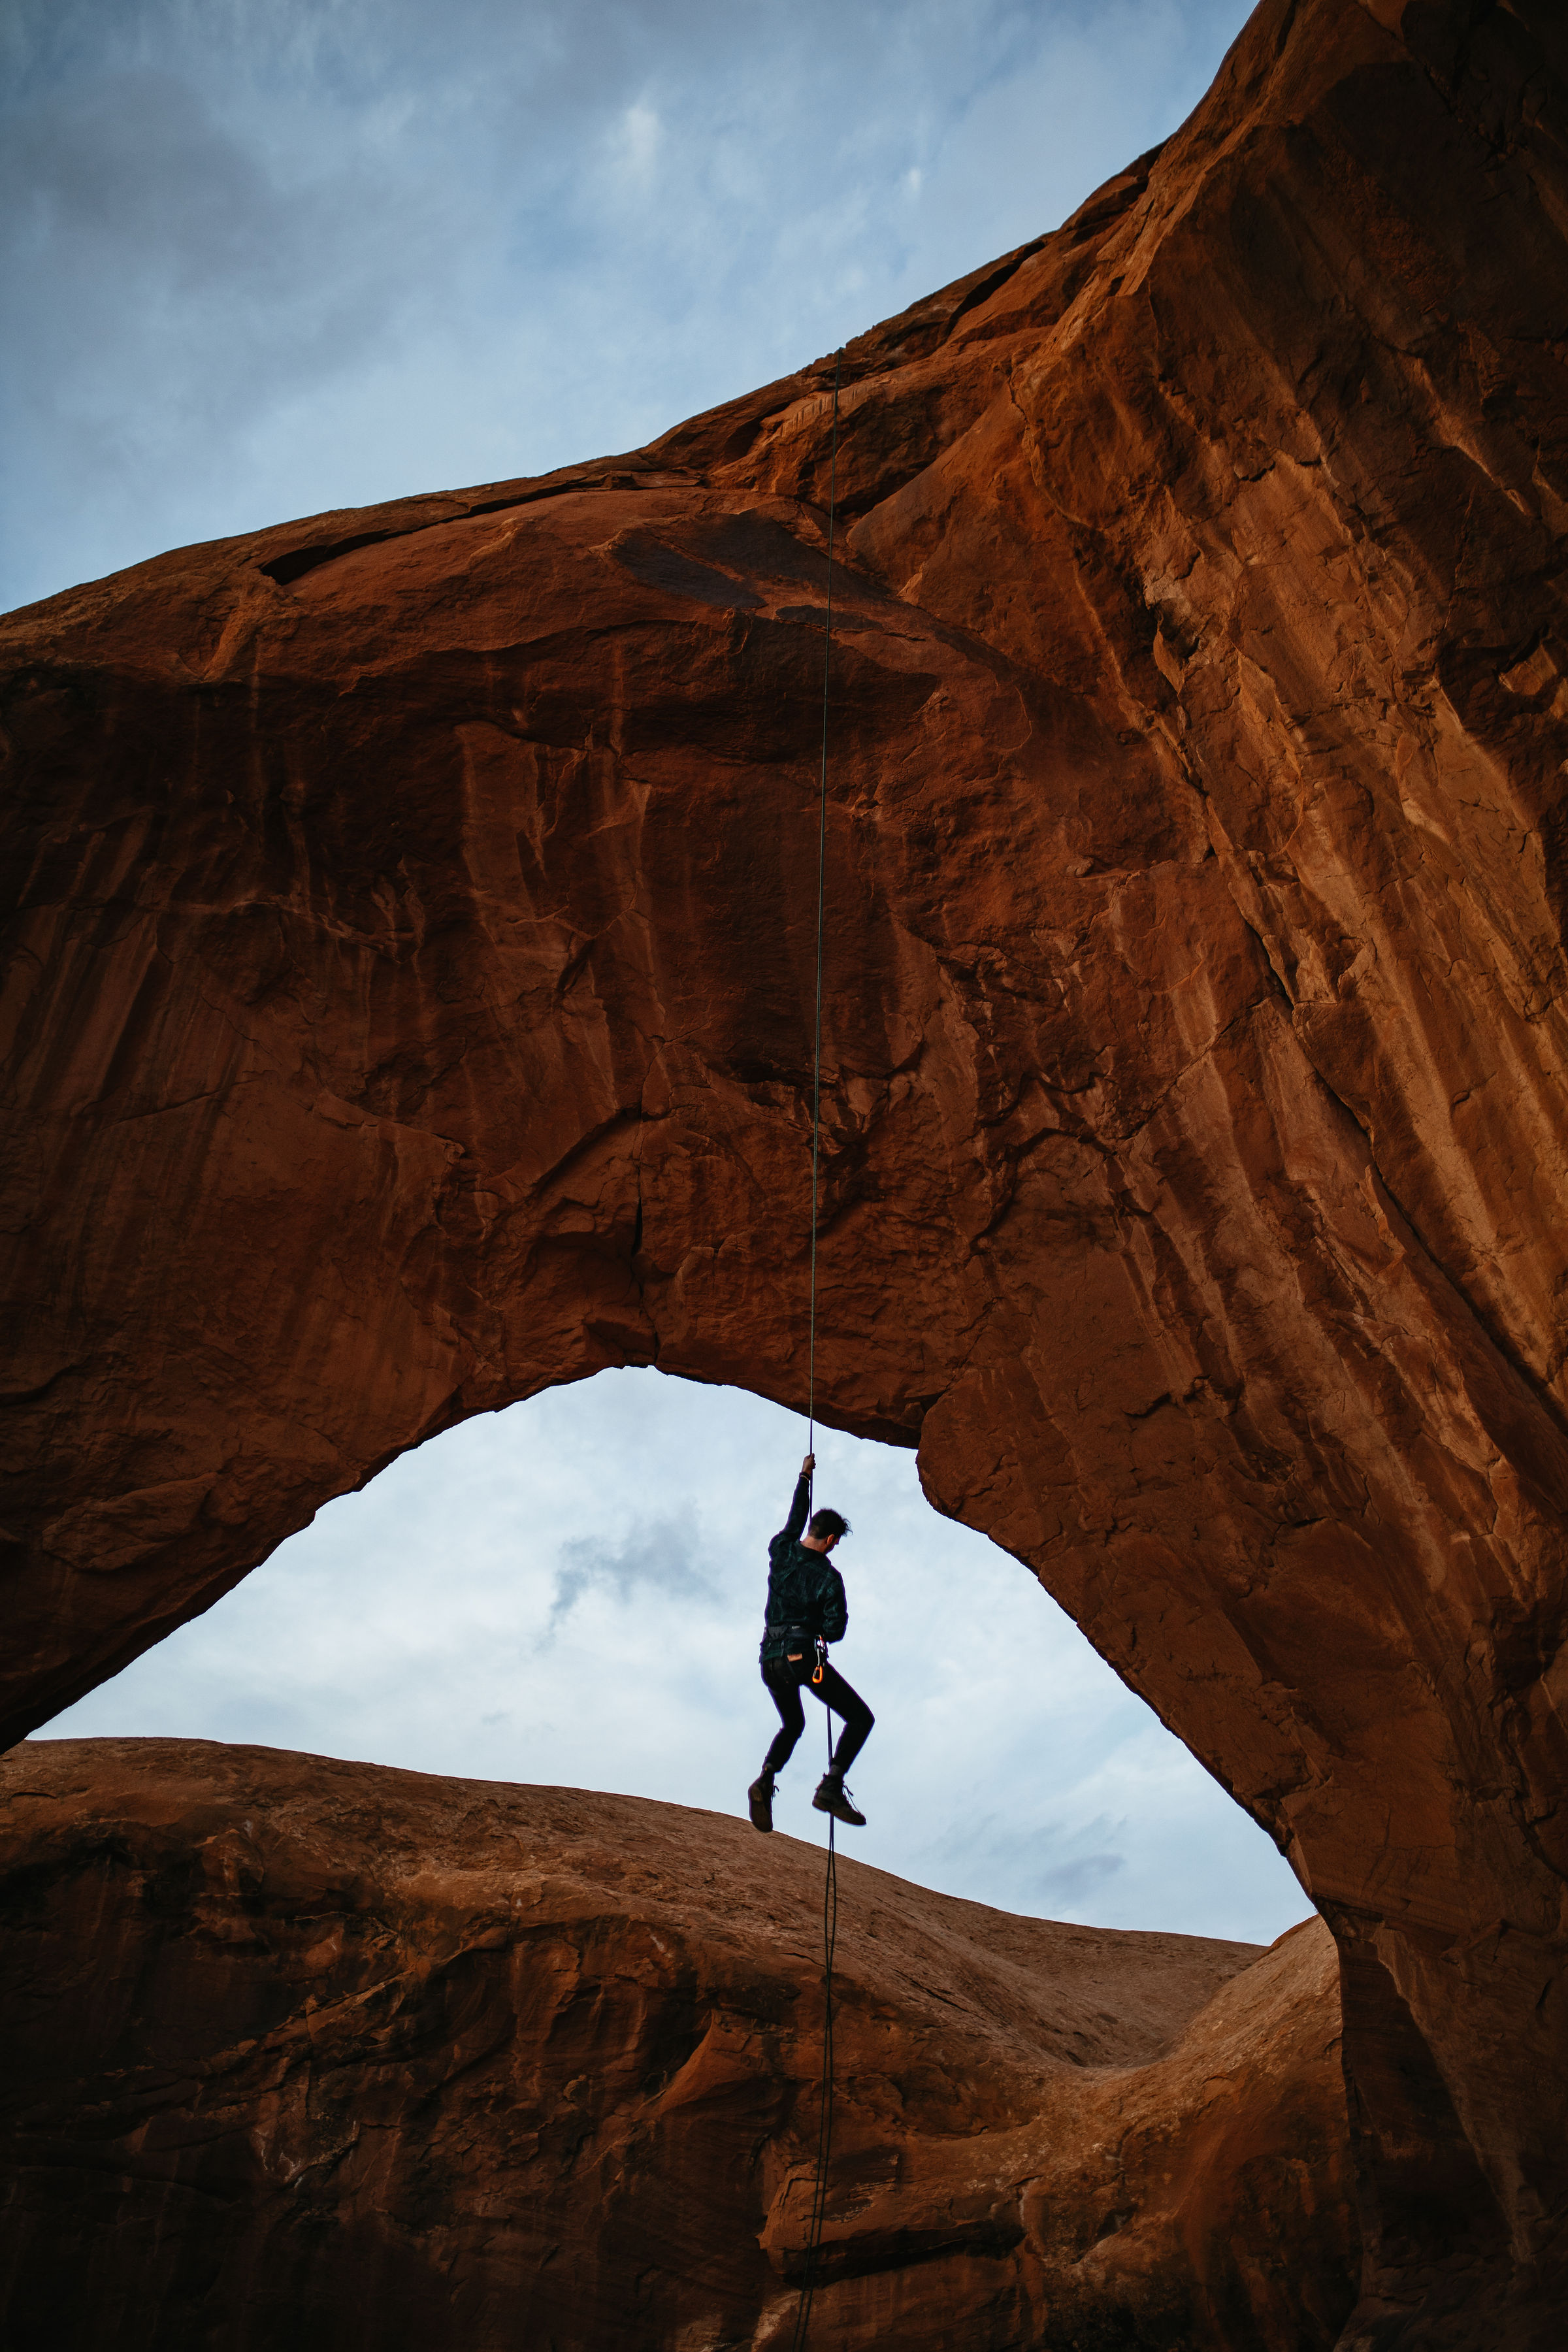 Hanging by a rope in Moab, Utah